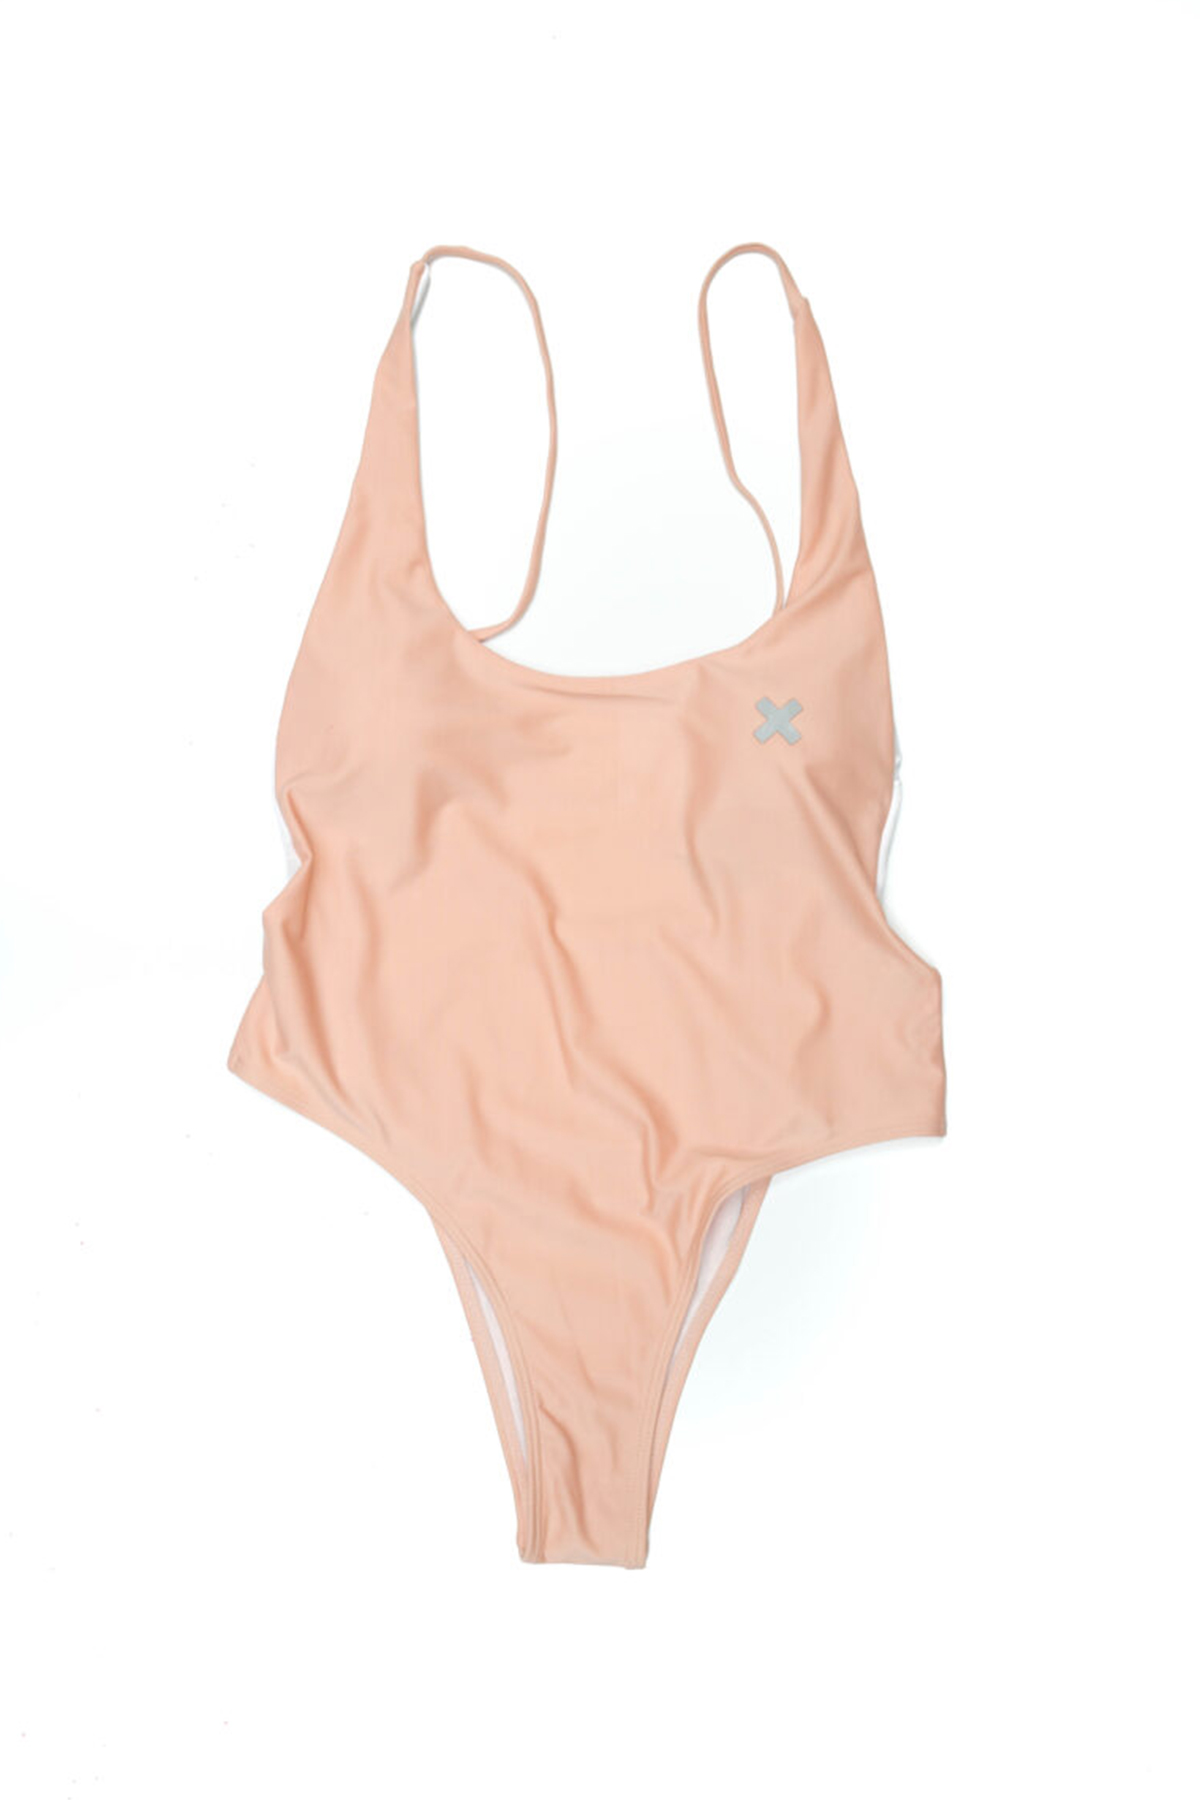 Time-Out-X-One-Piece-Bikini-Swimsuit—Light-Peach—Front